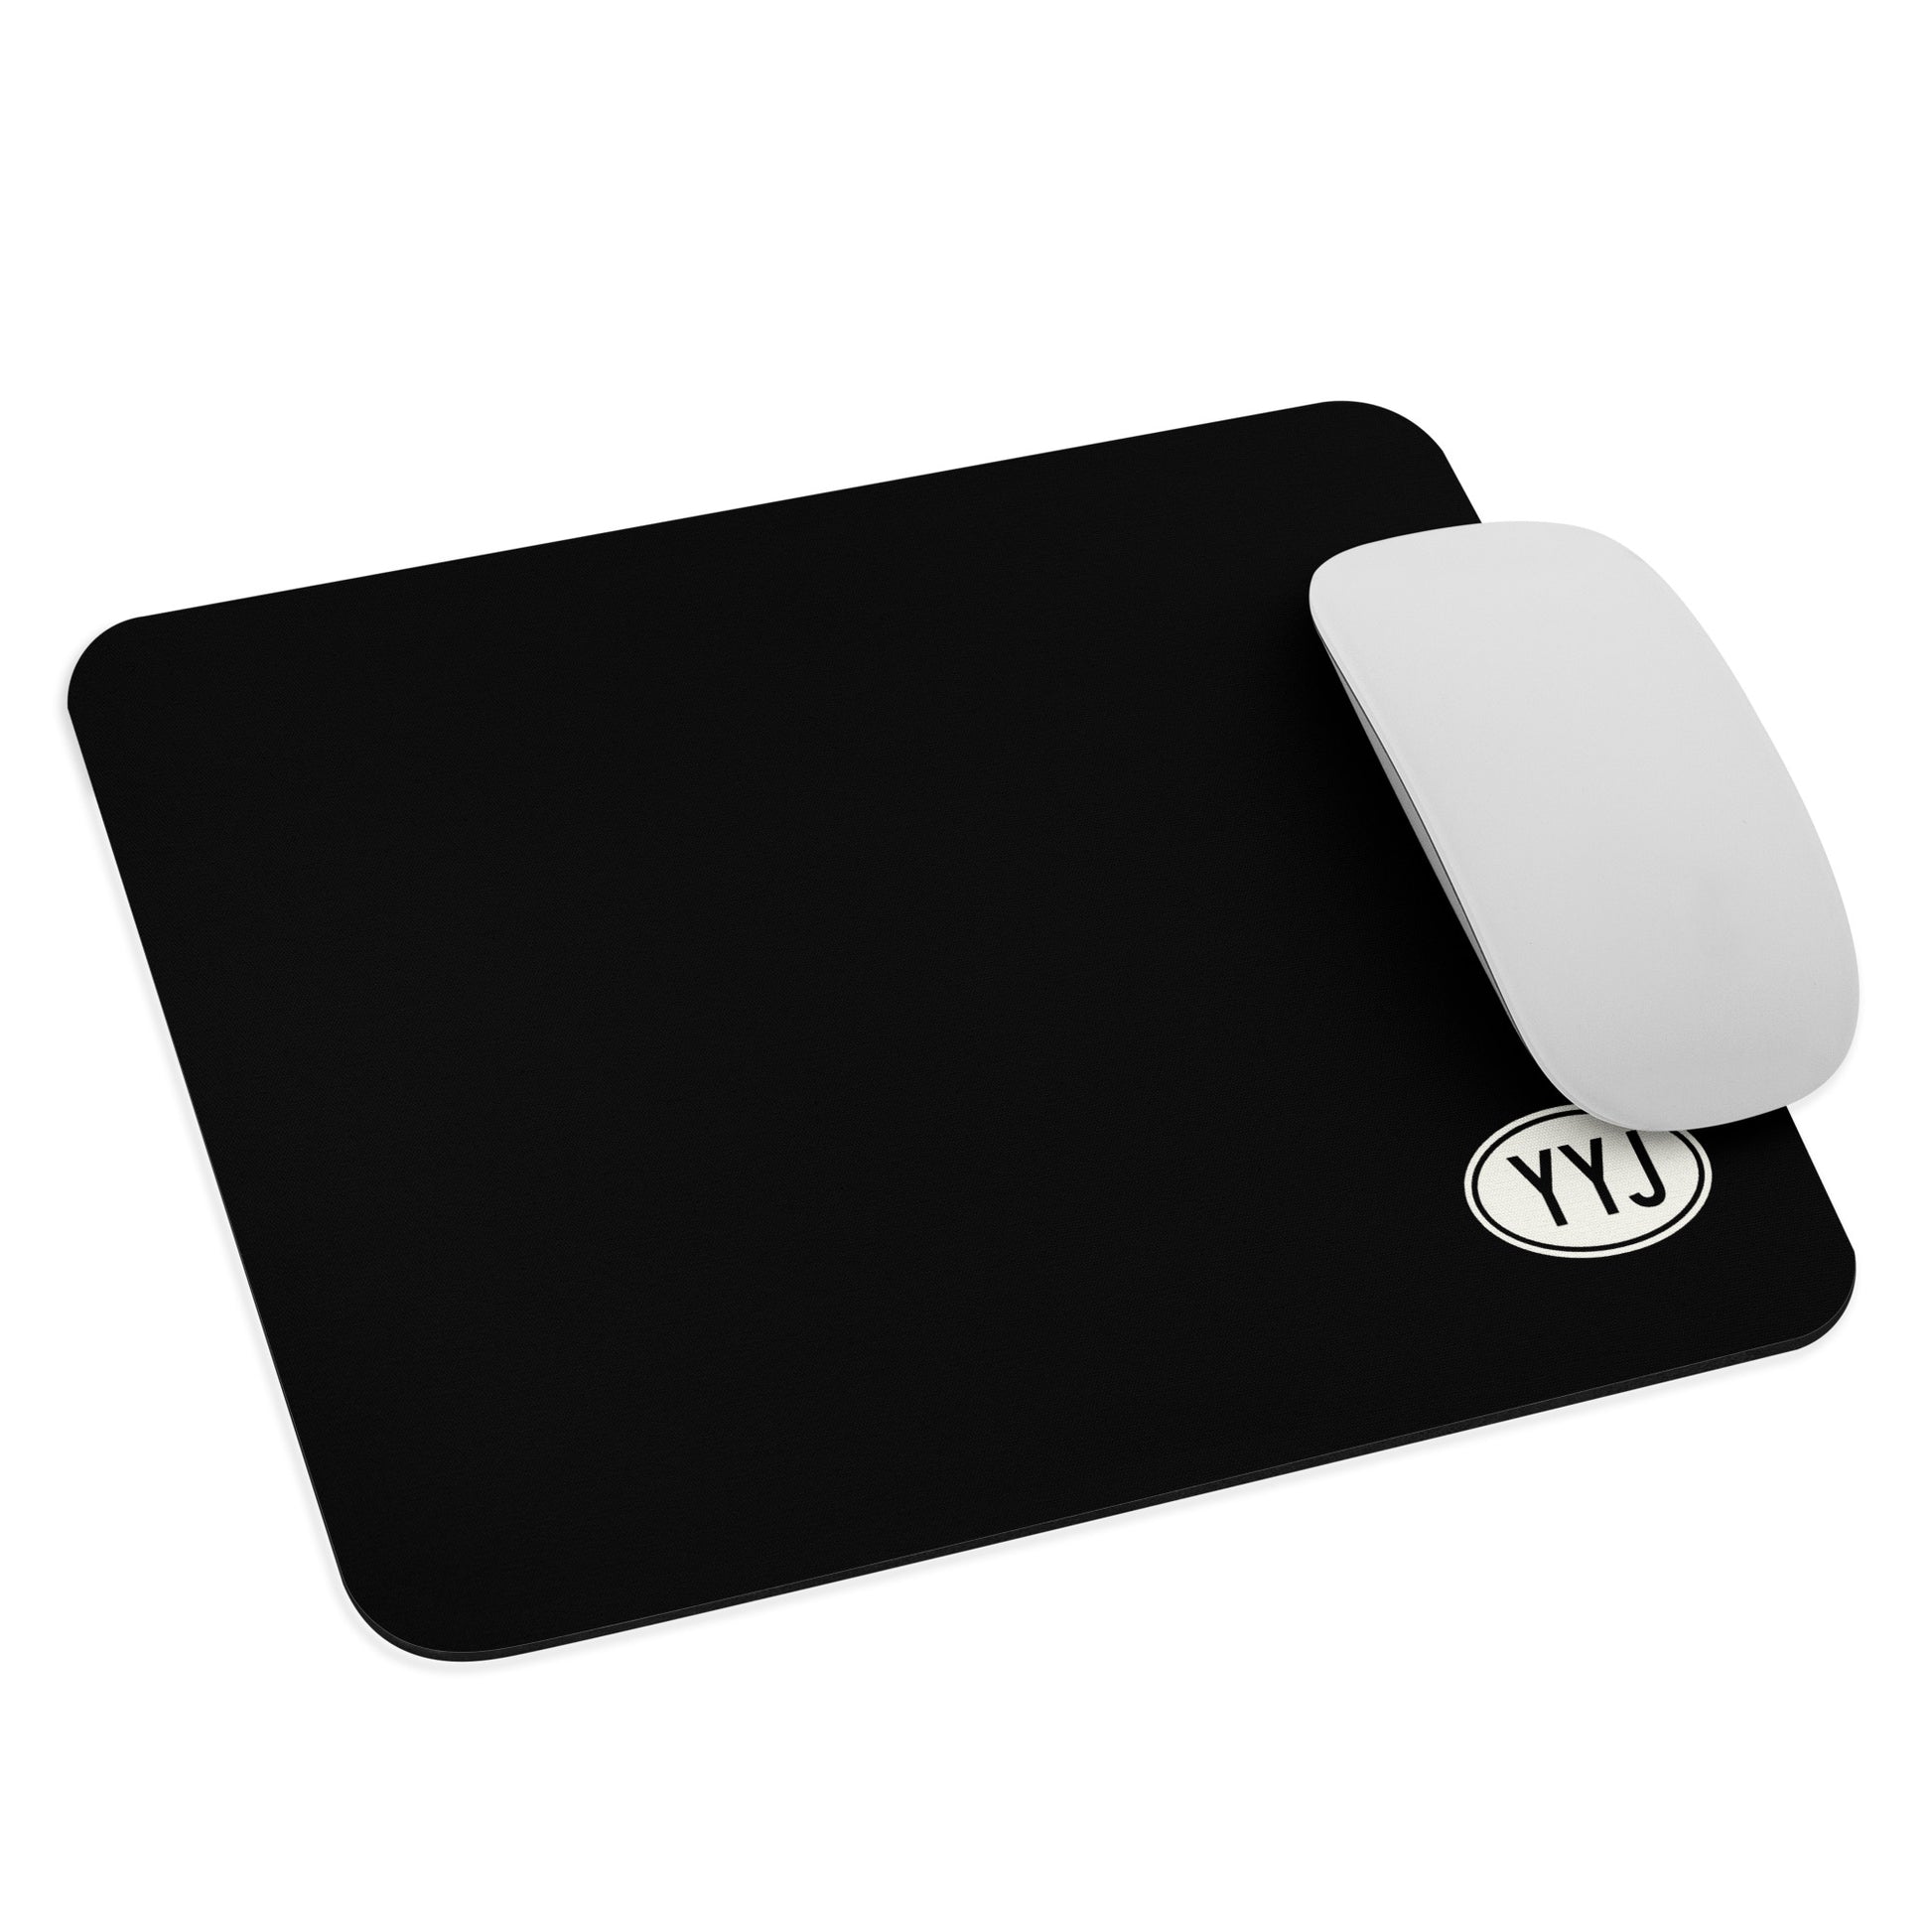 Unique Travel Gift Mouse Pad - White Oval • YYJ Victoria • YHM Designs - Image 03